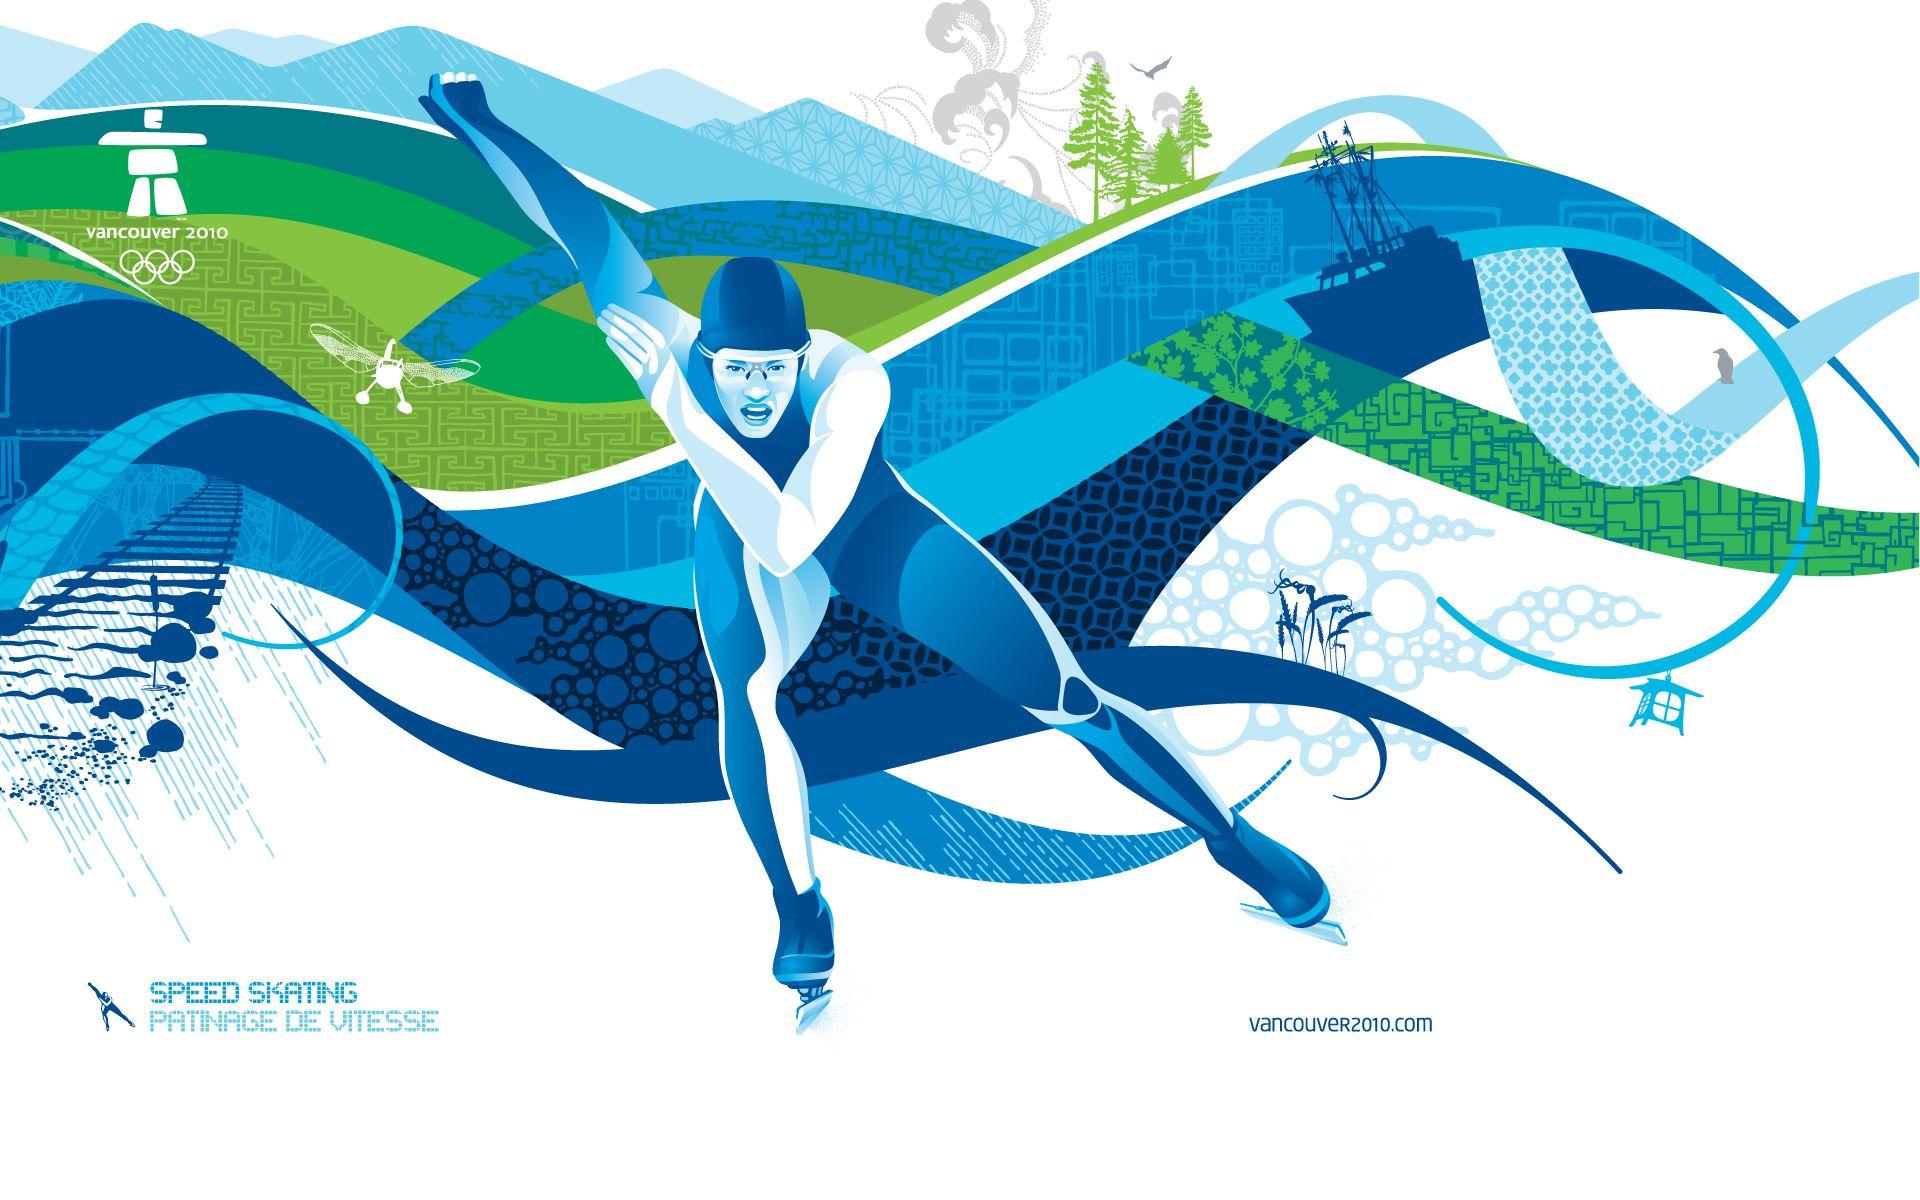 VANCOUVER 2010 WINTER OLYMPICS. THE LOOK OF THE GAMES - OLYMPIC